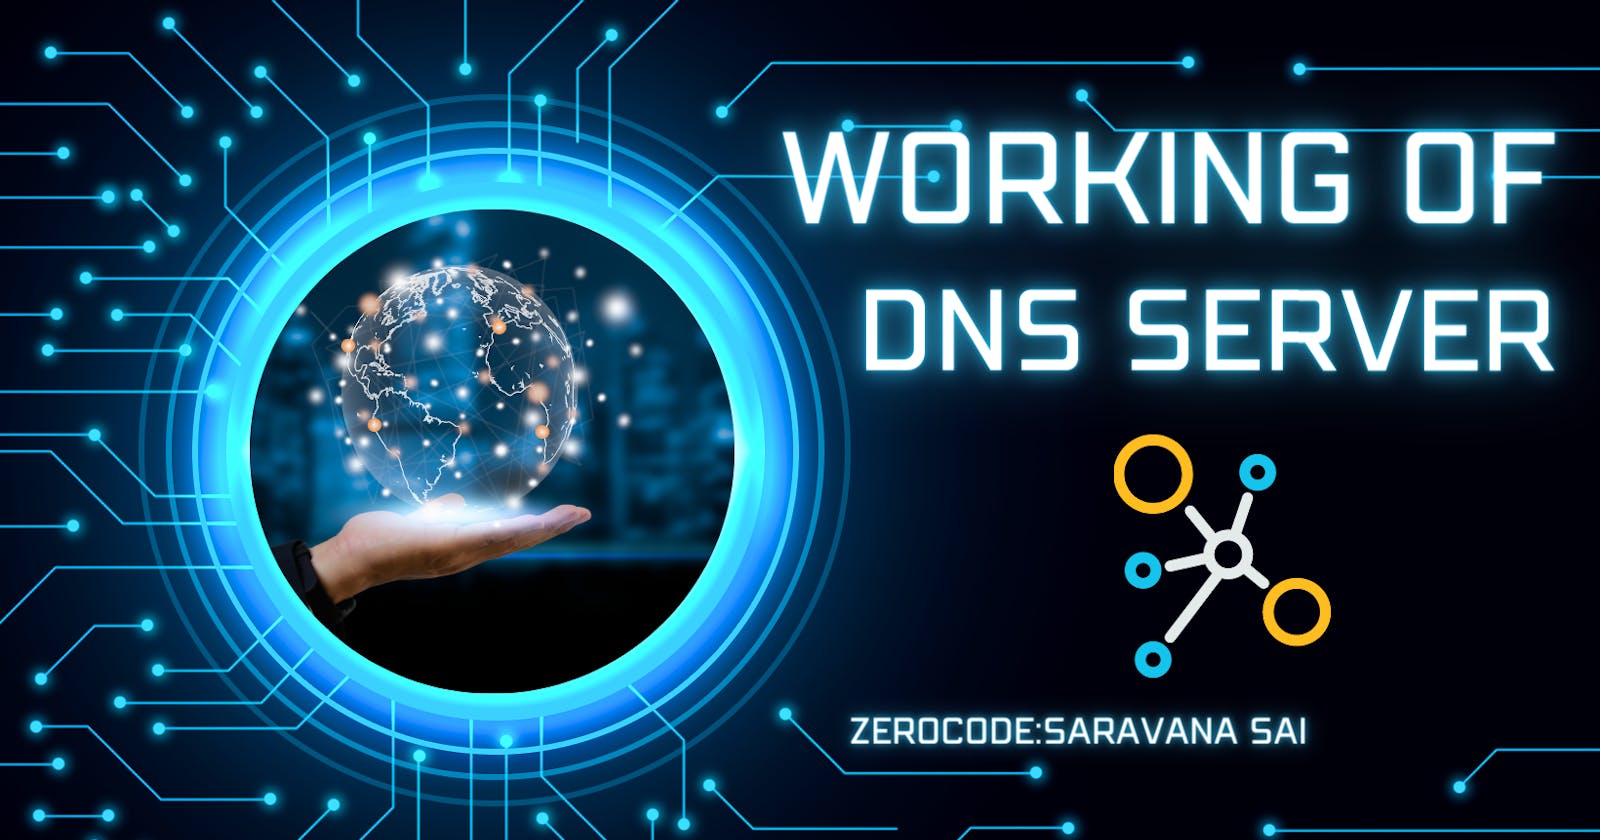 Behind the scenes of Domain Name System (DNS) Server